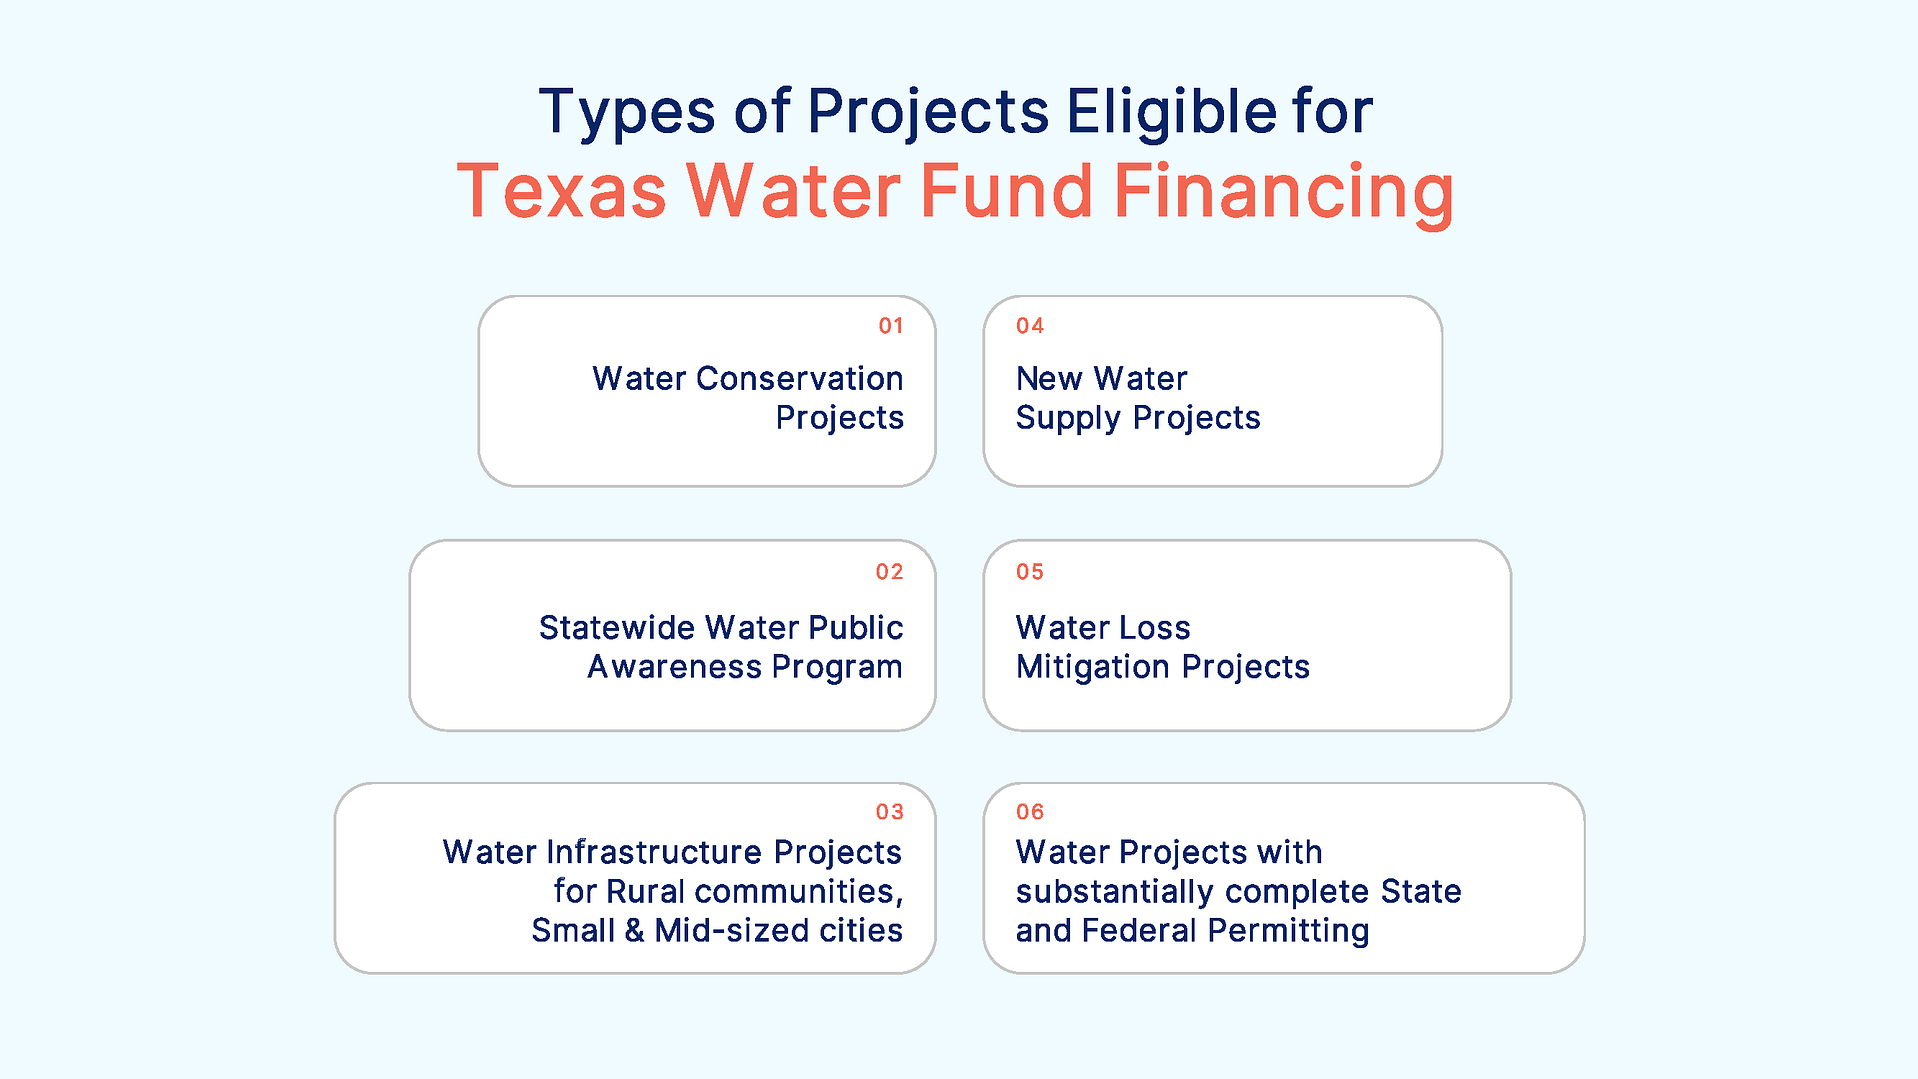 Types of projects eligible for Texas Water Fund financing